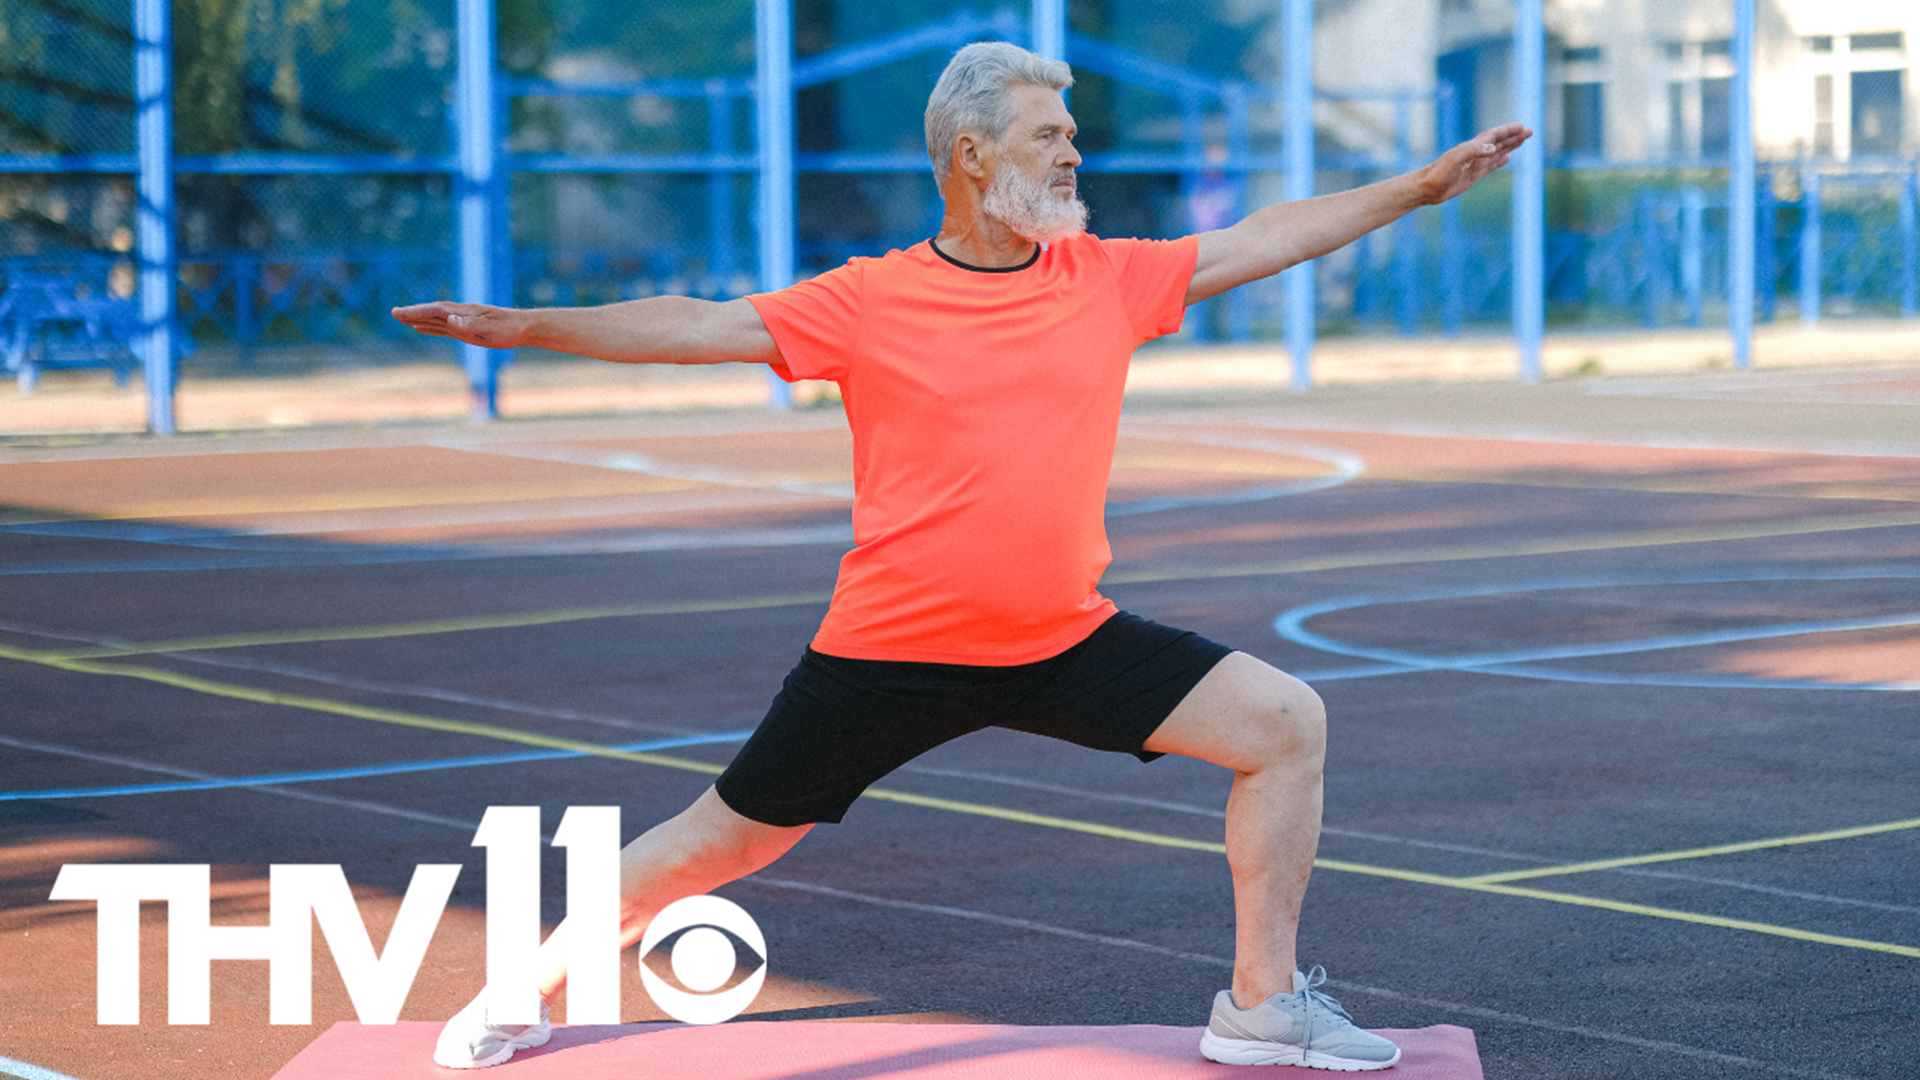 Dr. Joel Smith, Orthopedic Surgeon shares advice for older adults to help prevent injuries while working out, playing sports, and more.